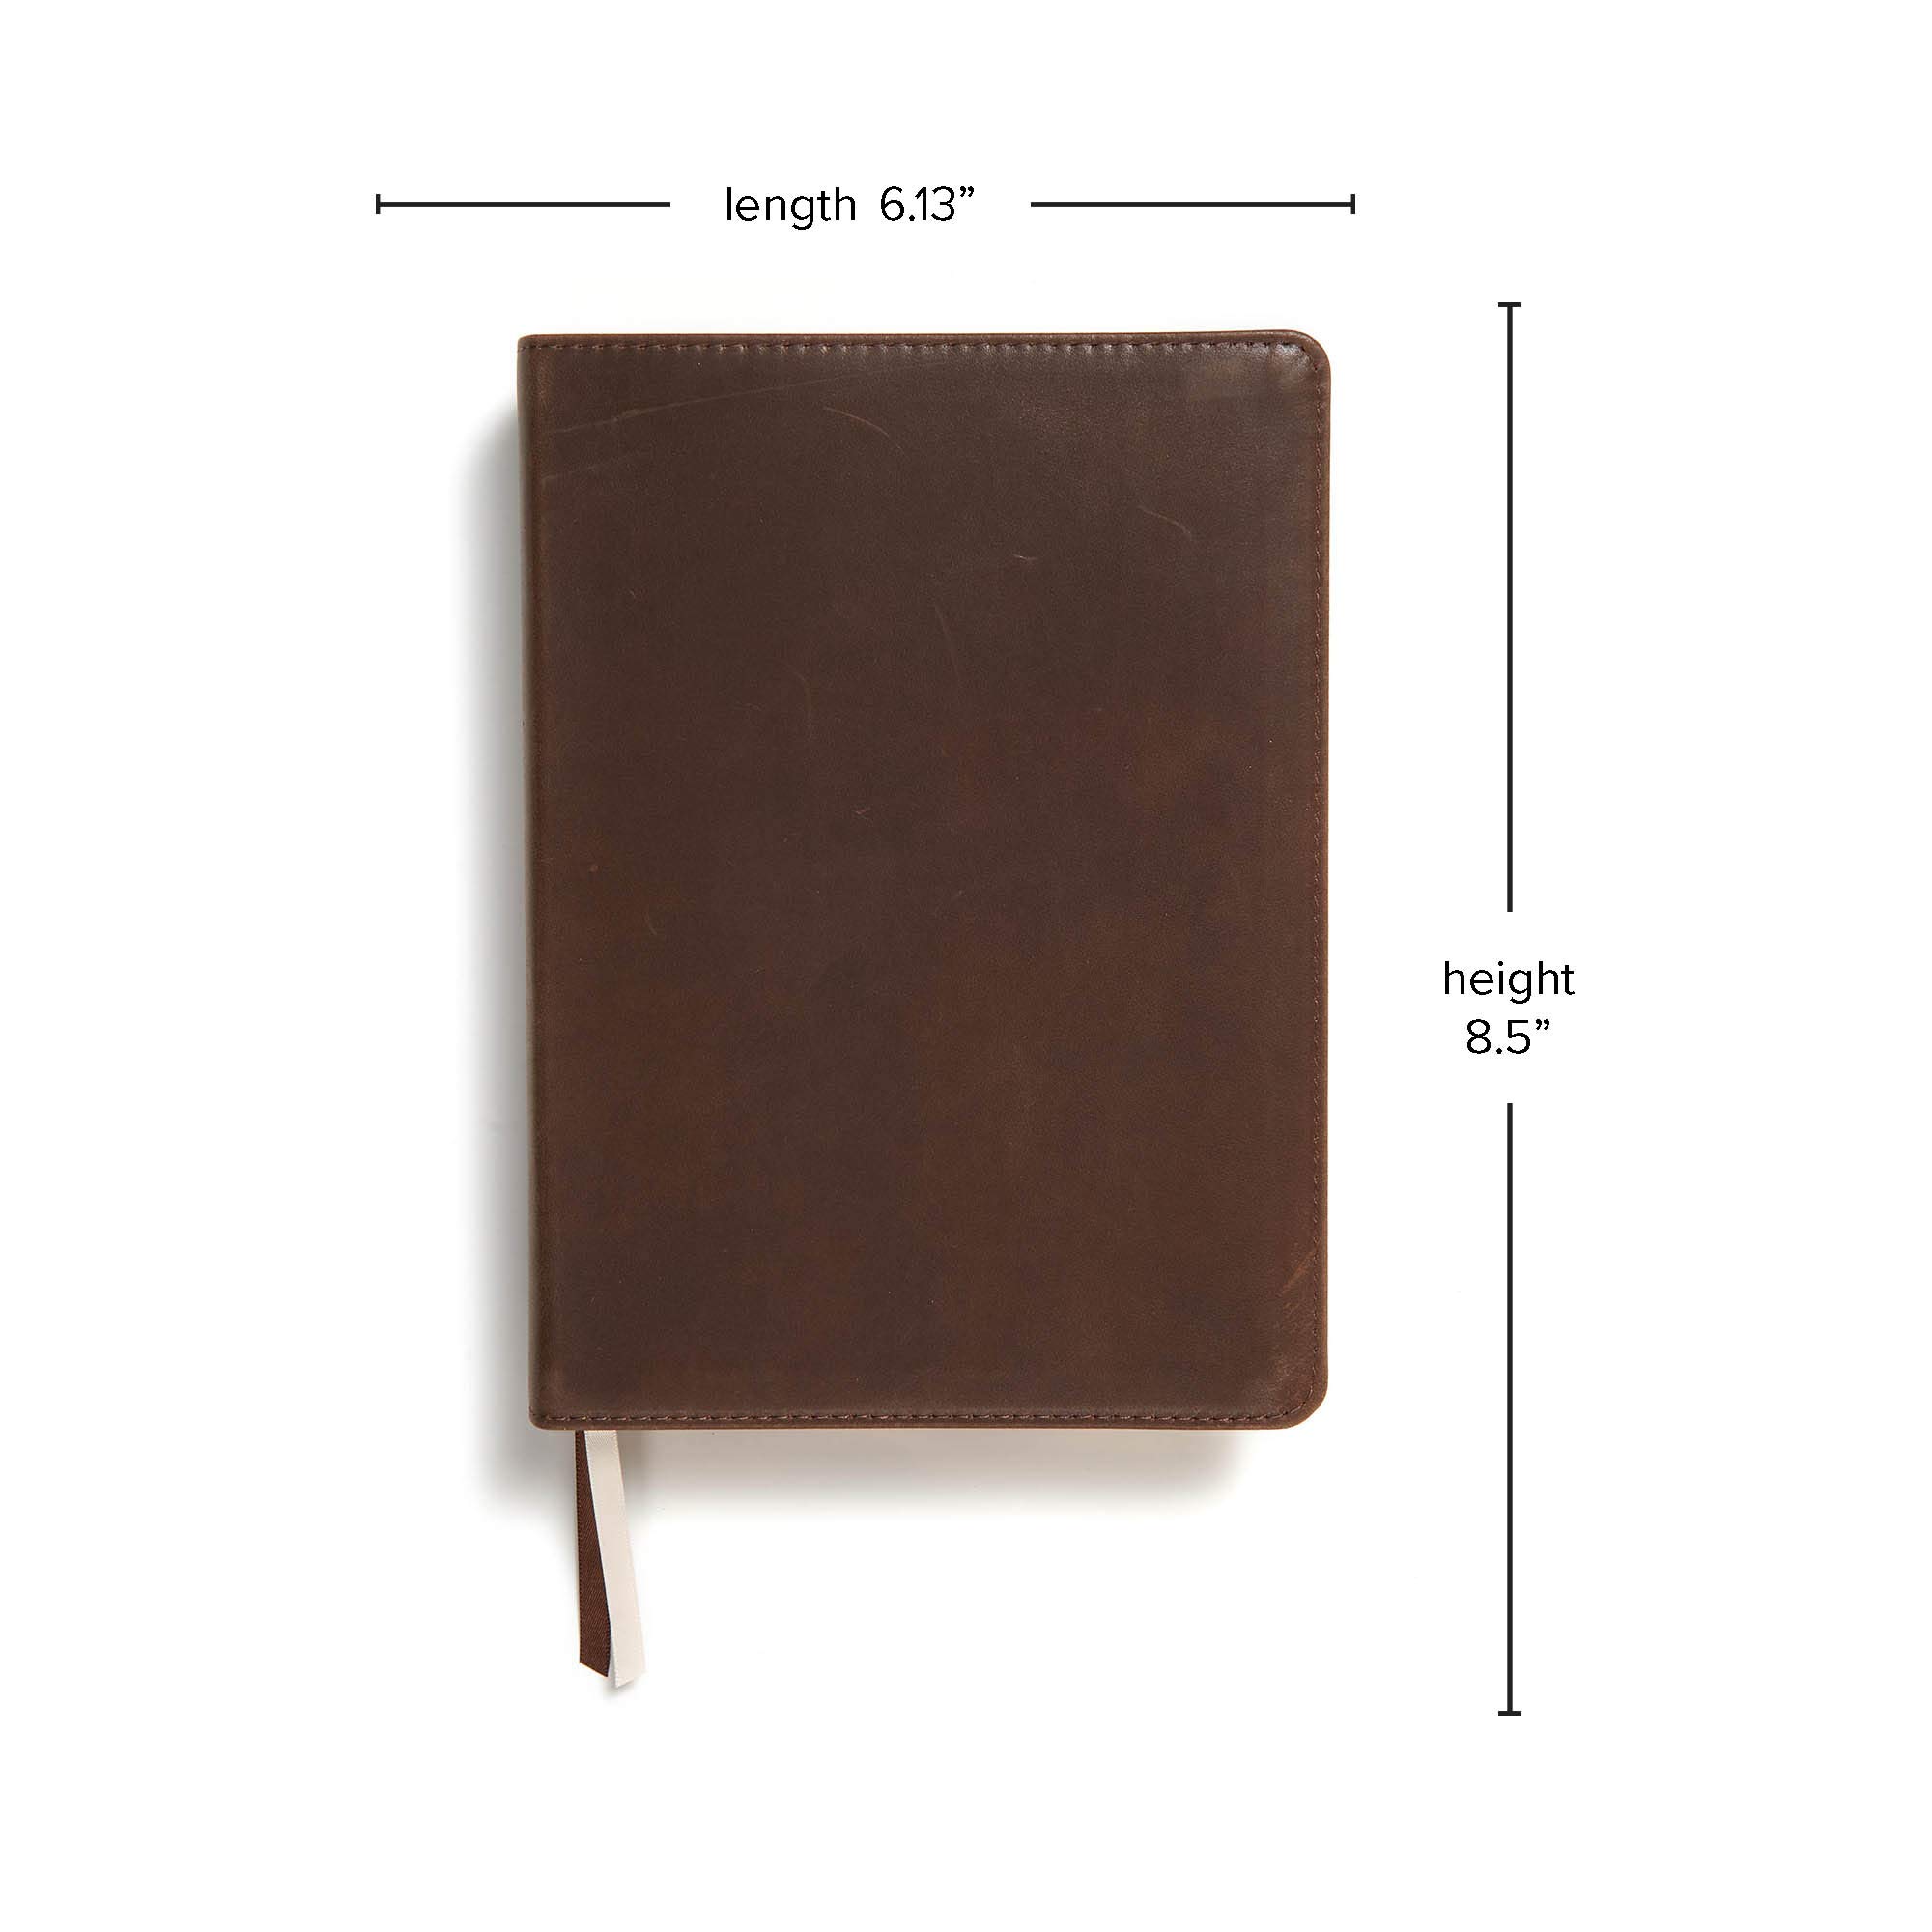 CSB She Reads Truth Bible, Brown Genuine Leather, Black Letter, Full-Color Design, Wide Margins, Notetaking Space, Devotionals, Reading Plans, Two ... Sewn Binding, Easy-to-Read Bible Serif Type